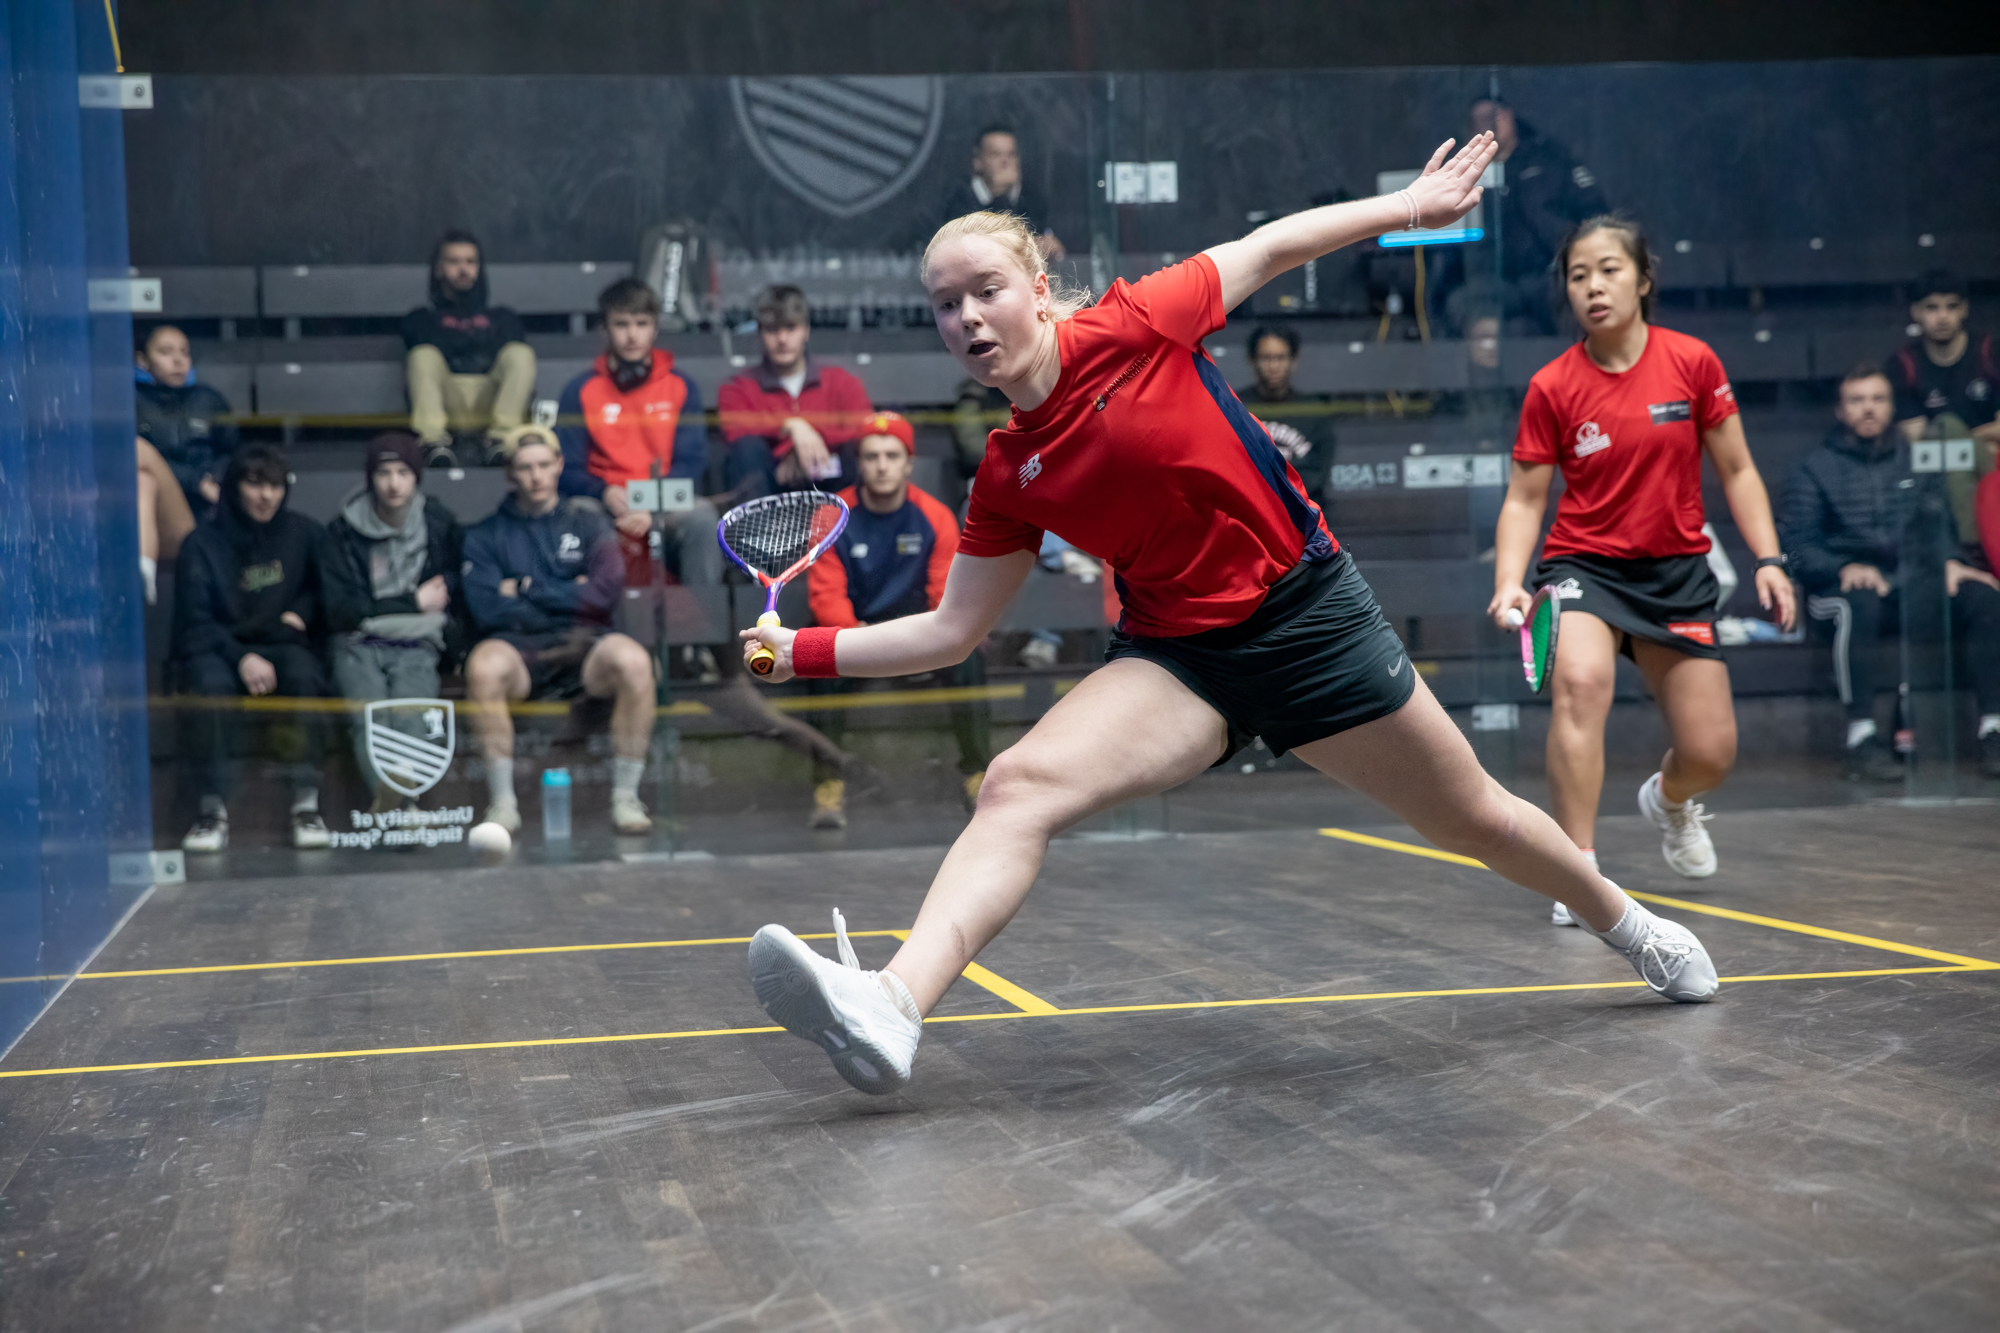 Performance Sqash Player, swinging to hit squash ball in court